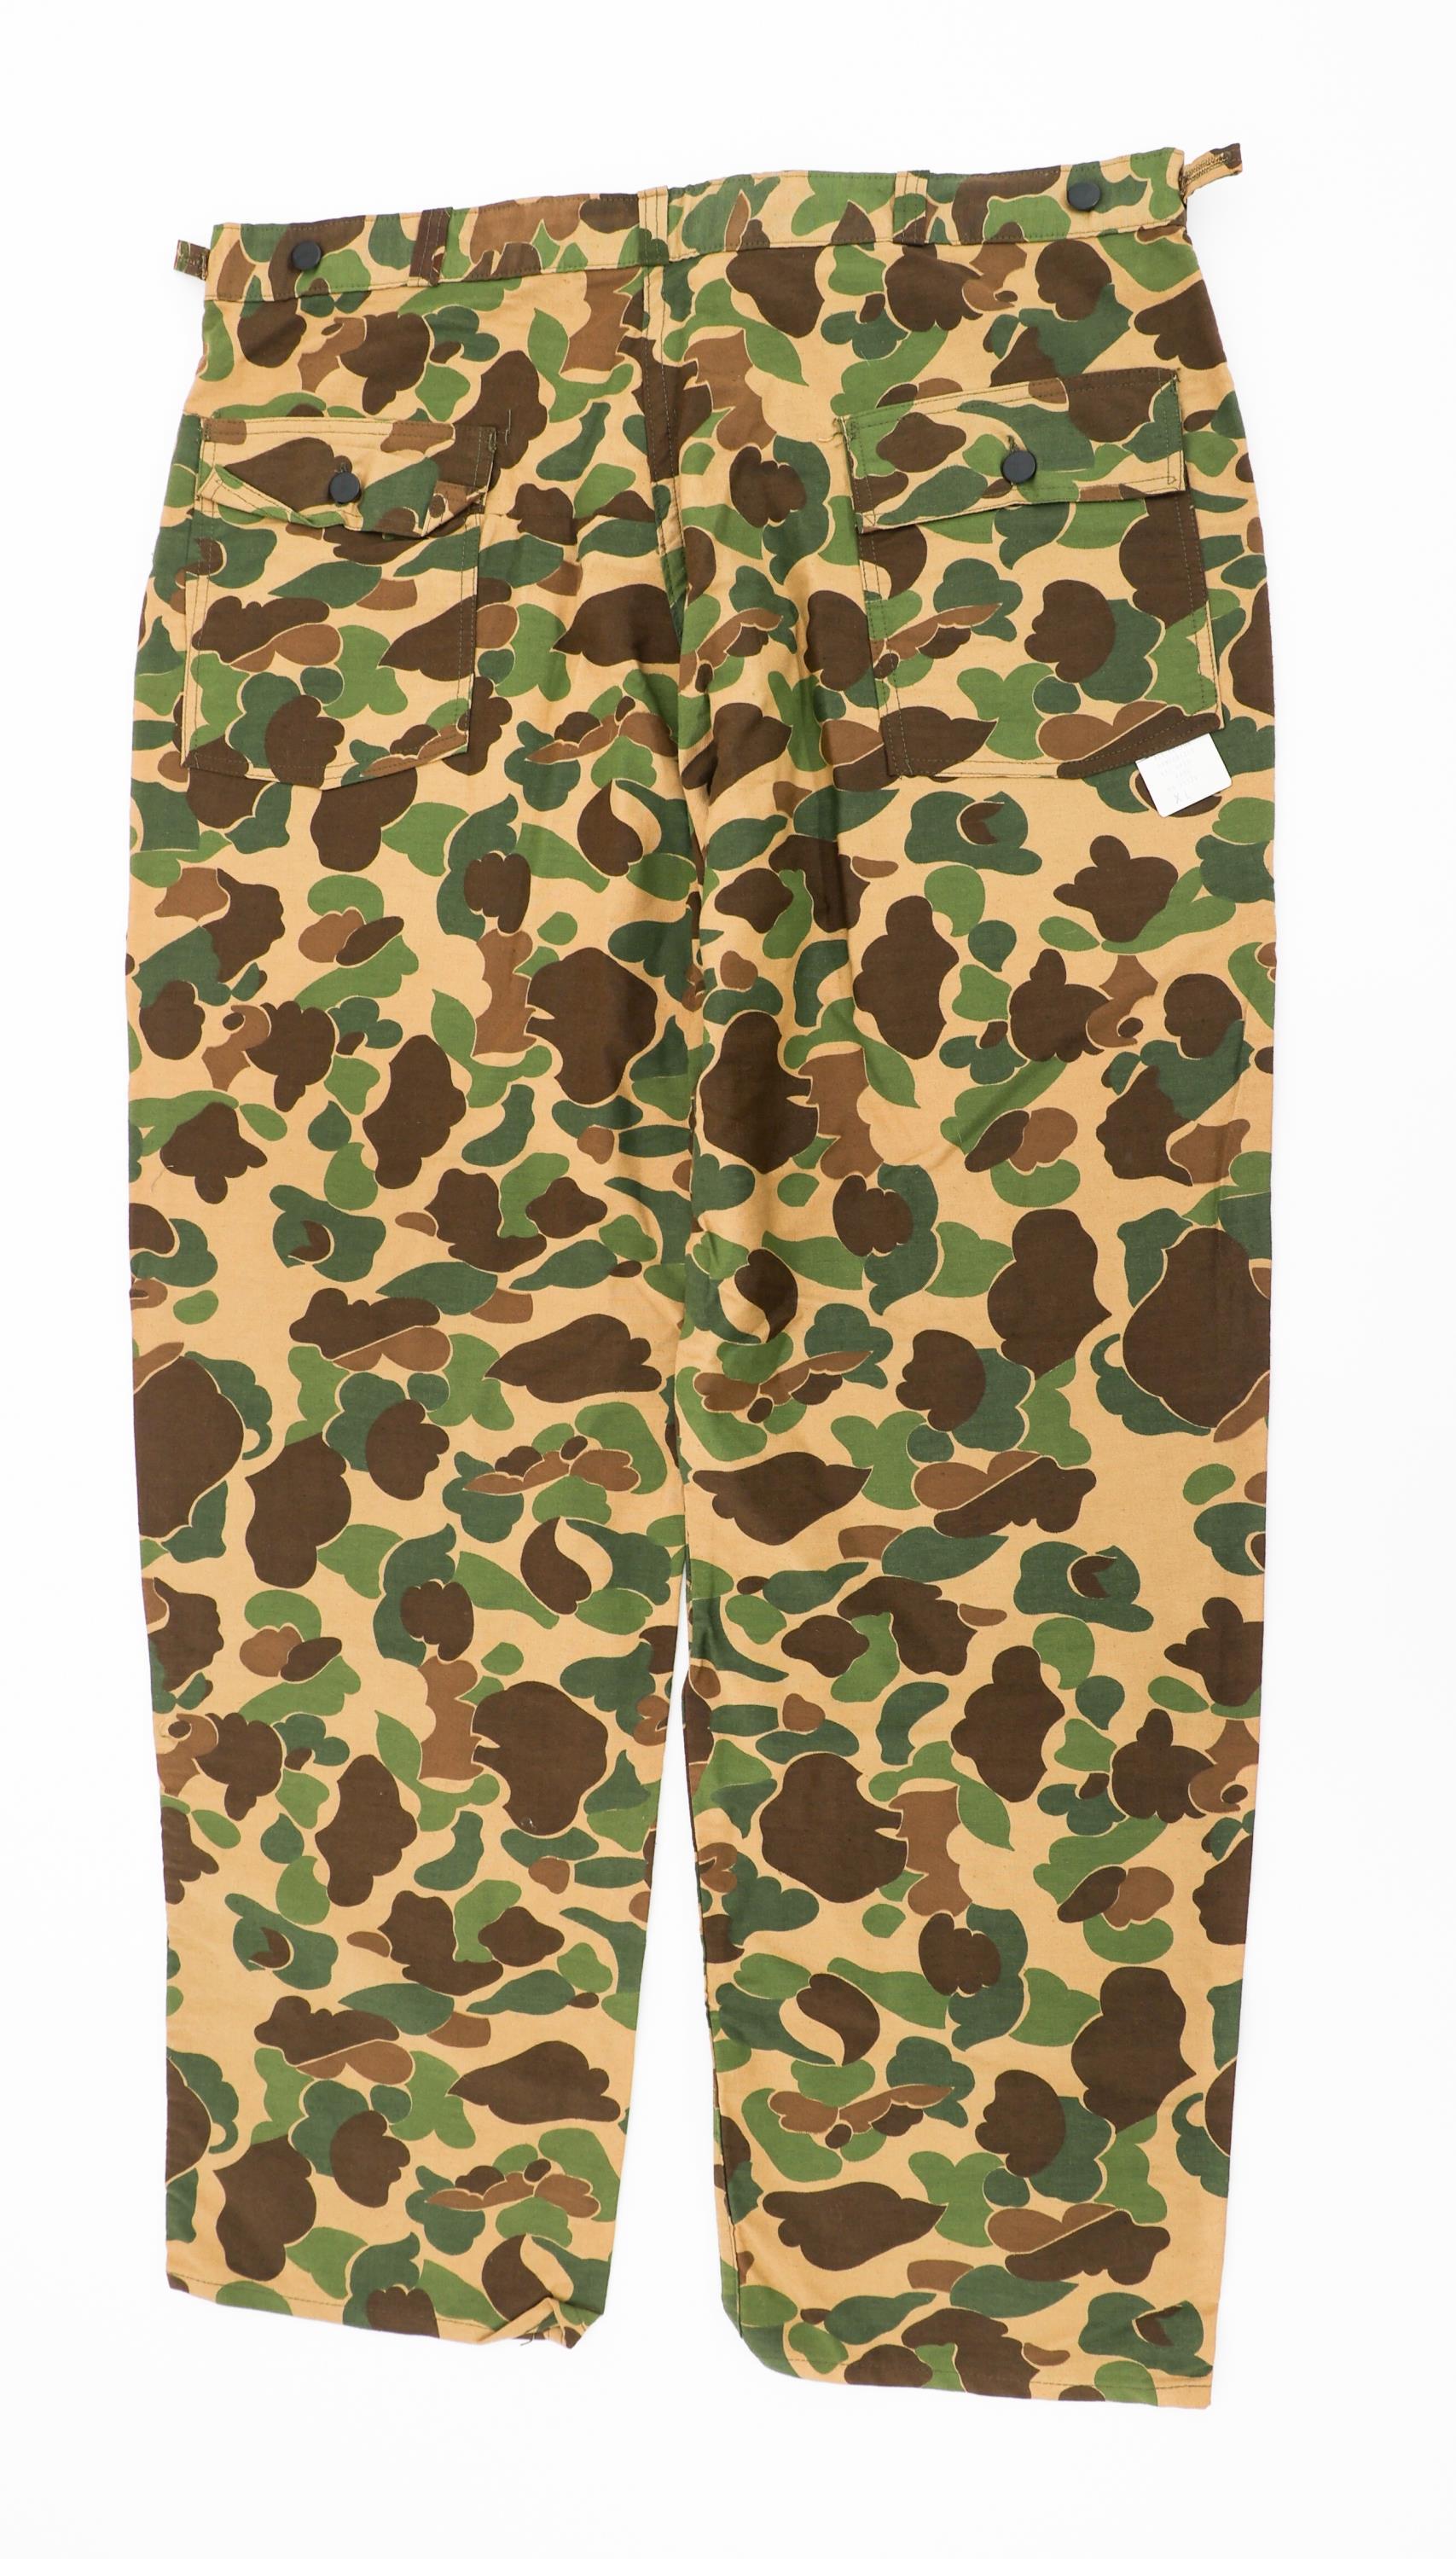 PRIVATE PURCHASE DUCK HUNTER & TIGER STRIPE PANTS